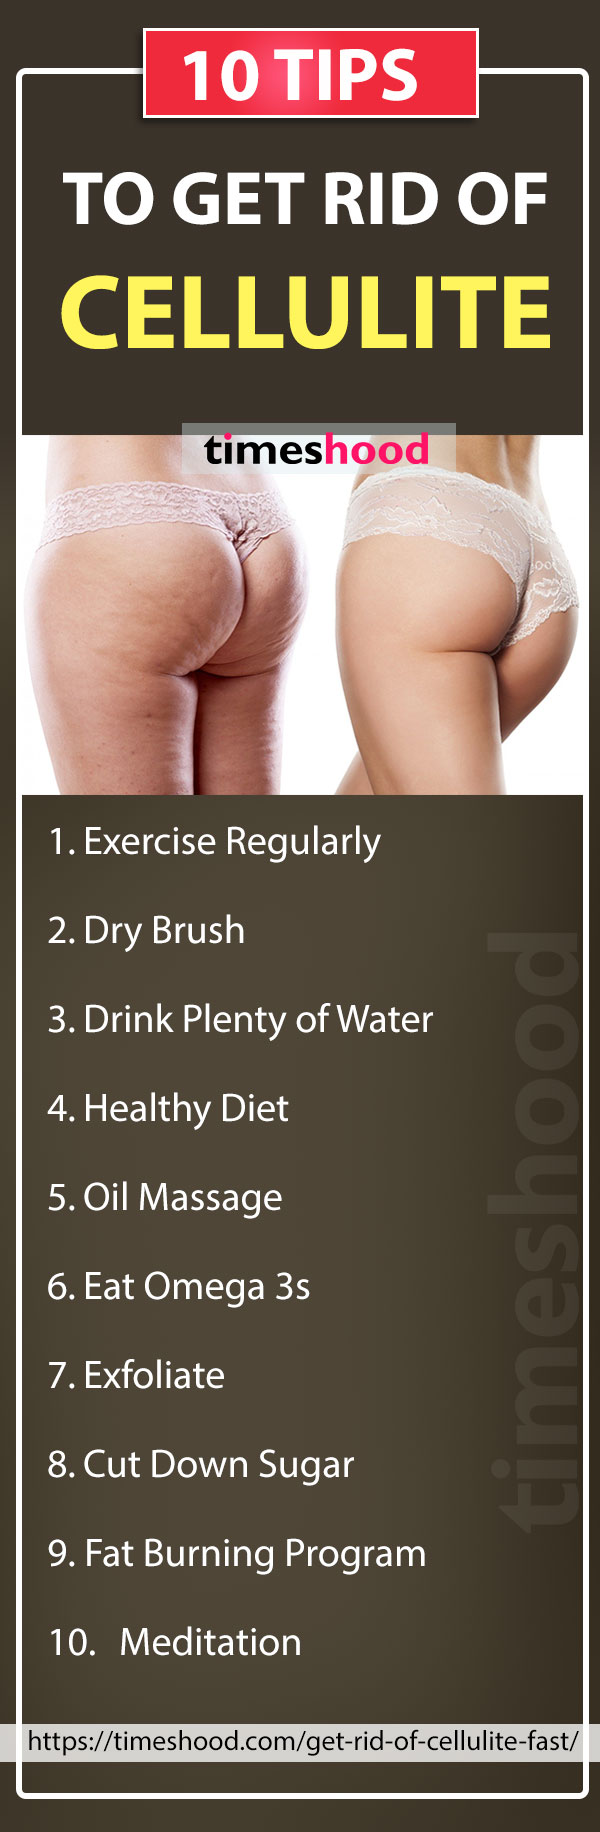 How to get rid of cellulite on buttocks and thighs fast? Challenge to Get Rid of Cellulite. Find out how to get rid of cellulite, firm legs, and smooth thighs with this 20-minute workout routine. Best tips to get rid of cellulite on buttocks and thighs fast. Tips and hacks to get rid of Cellulite.